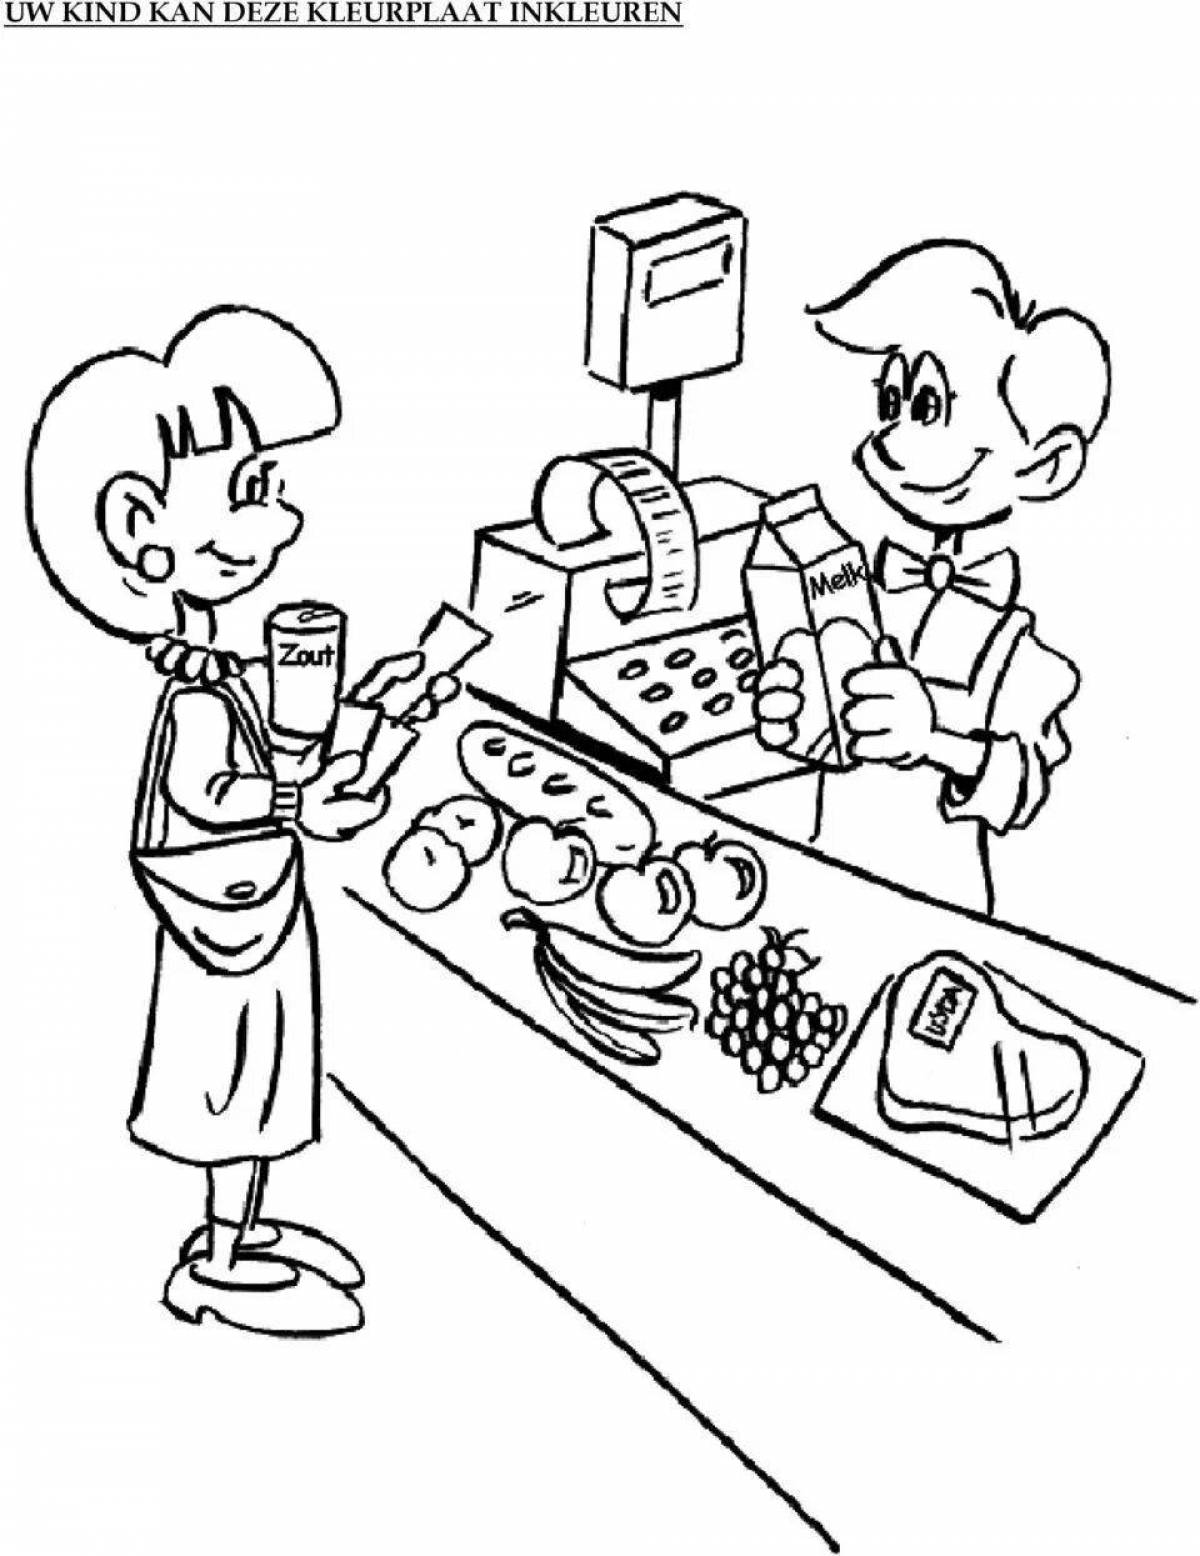 Coloring page charming saleswoman